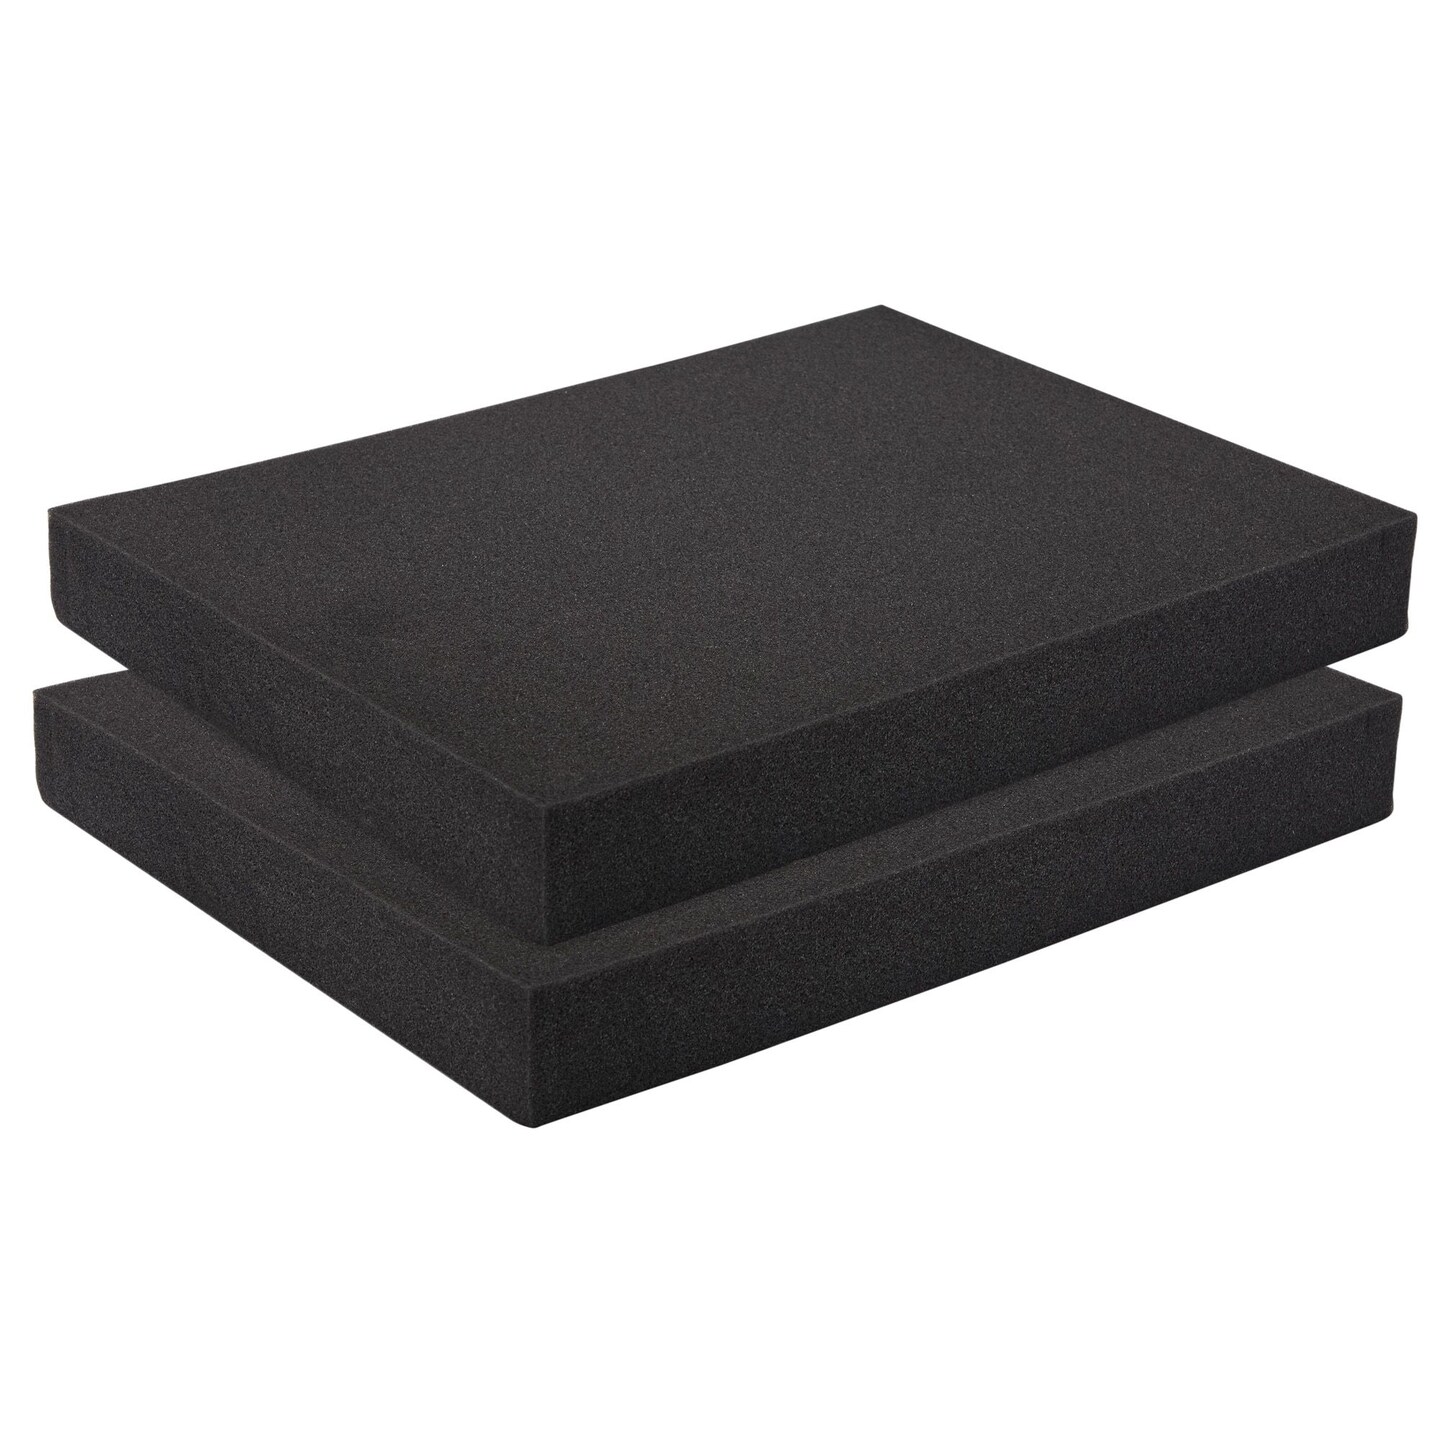 2-Pack Packing Foam Sheets - 16x12x2 Customizable Polyurethane Insert Pads  for Tool Case Cushioning, Crafts (Black)